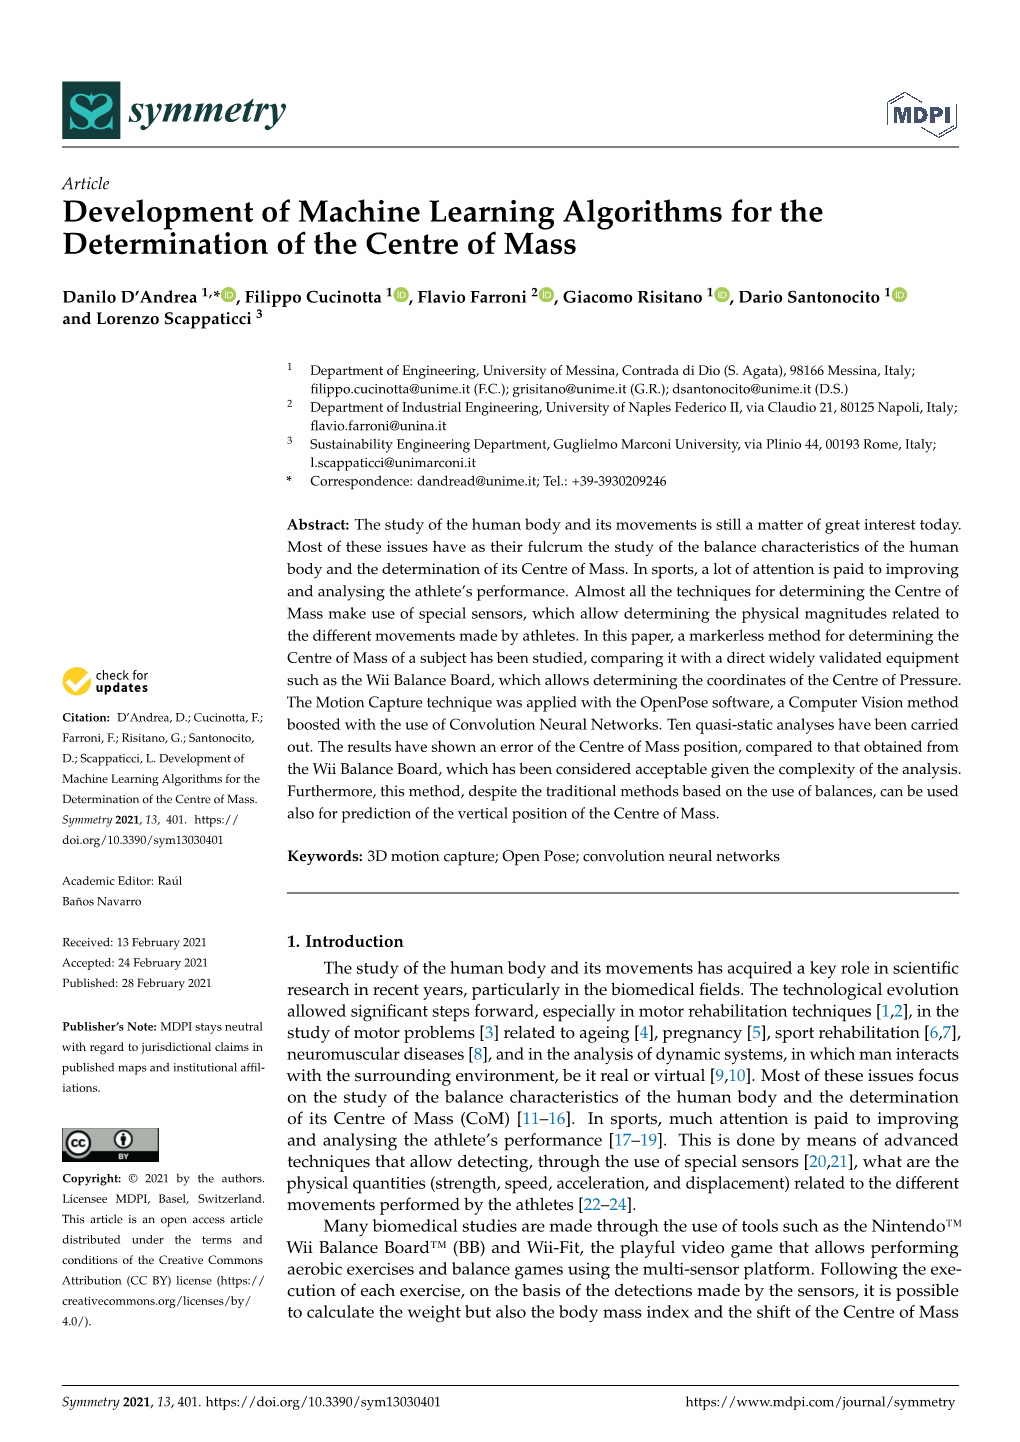 Development of Machine Learning Algorithms for the Determination of the Centre of Mass